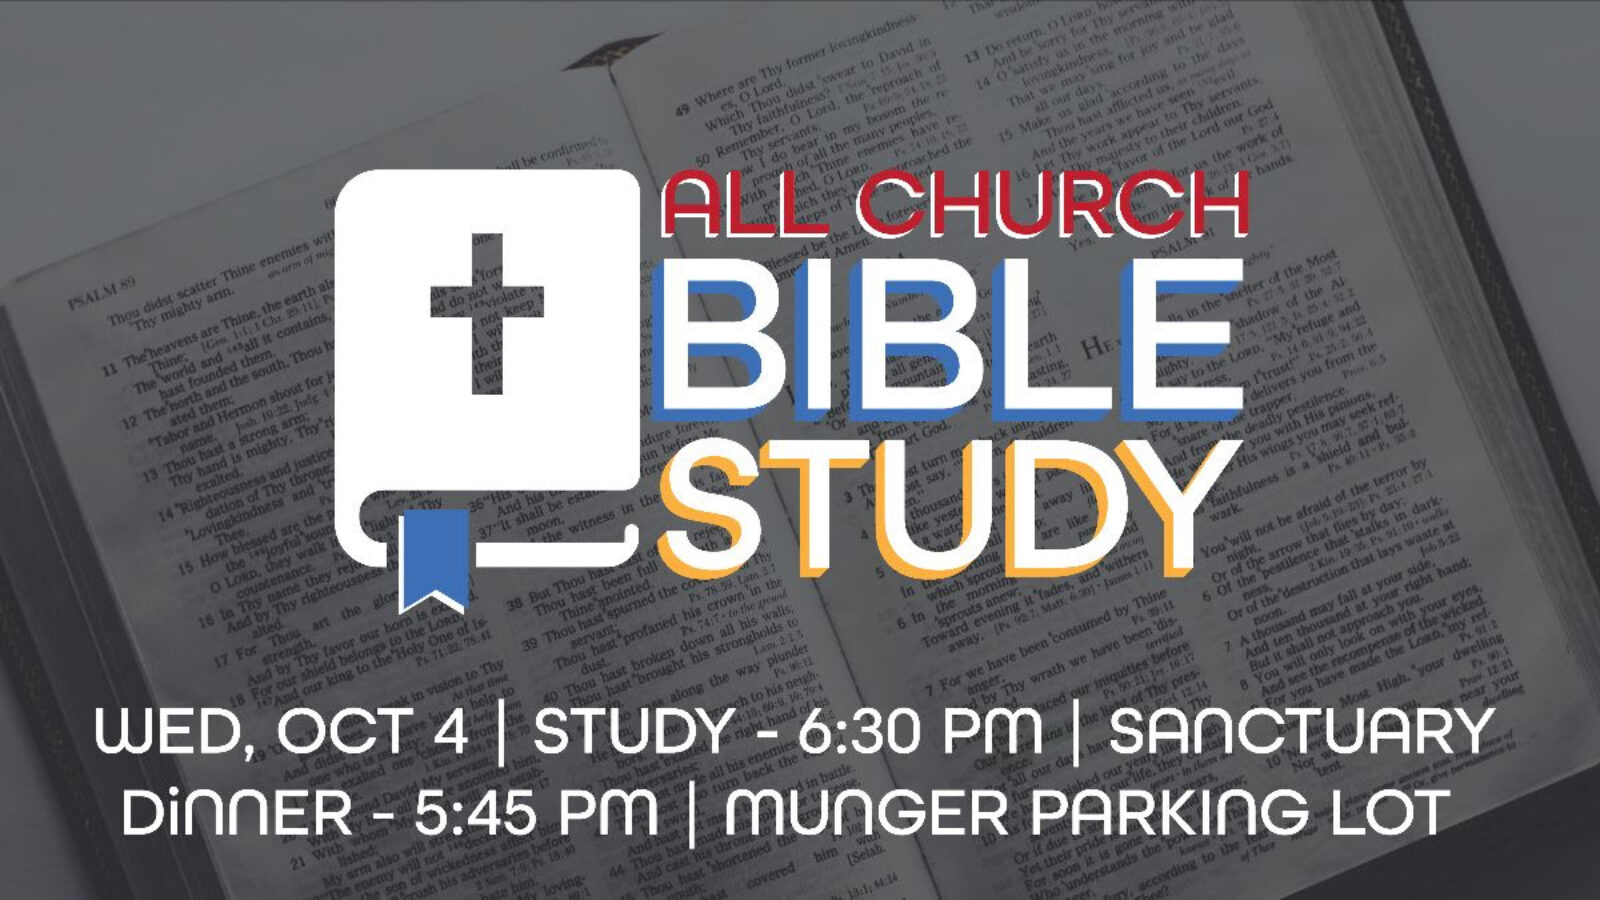 ALL CHURCH DINNER AND BIBLE STUDY